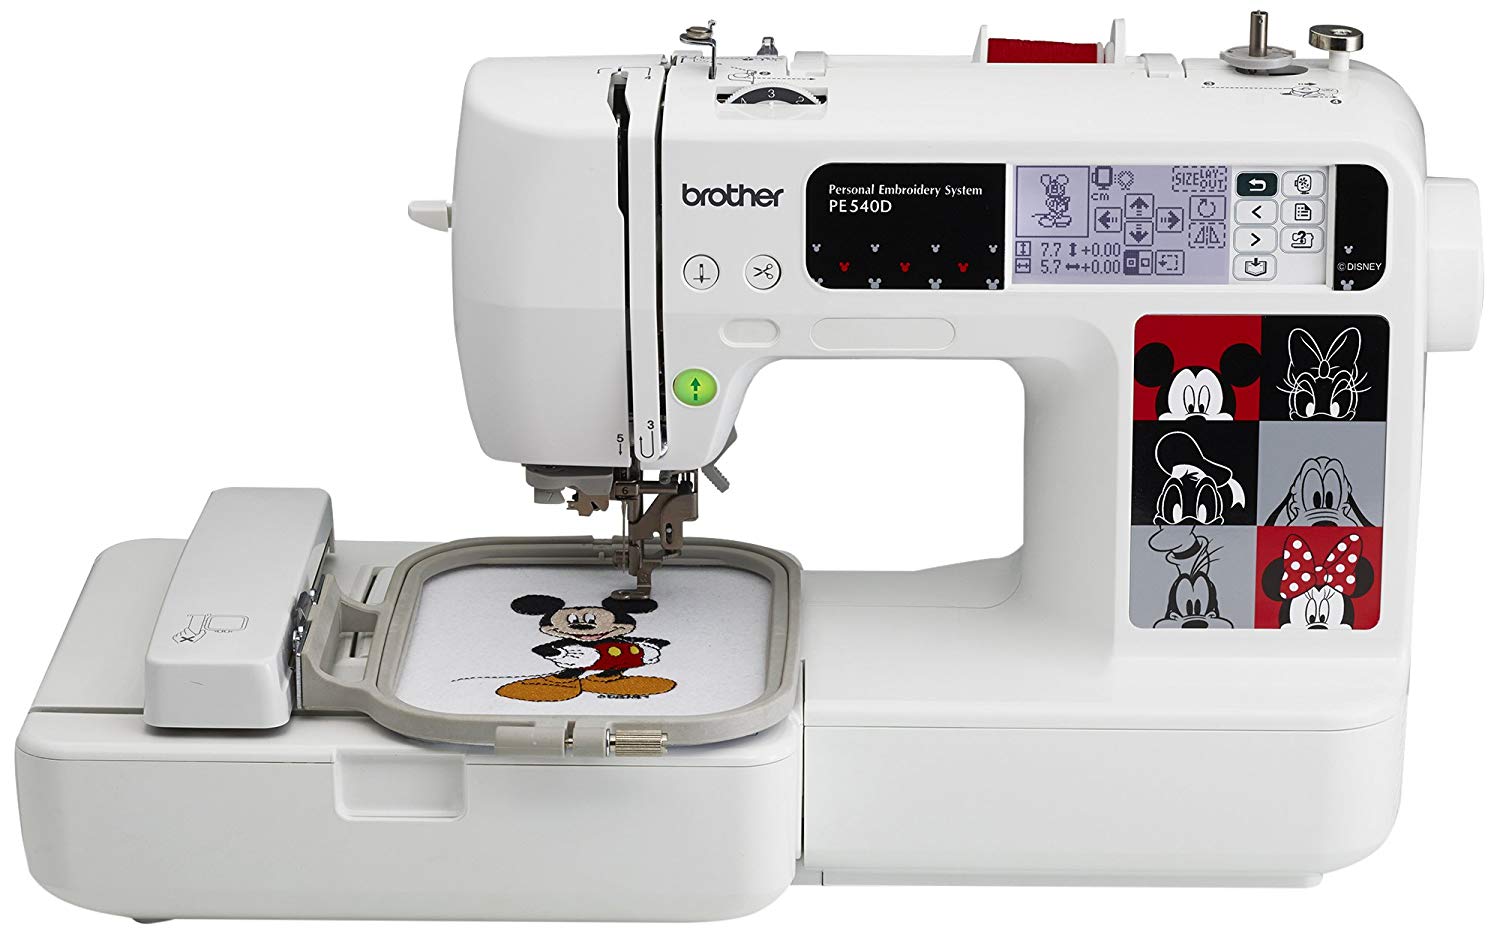 Brother PE540D 4x4 Embroidery Machine